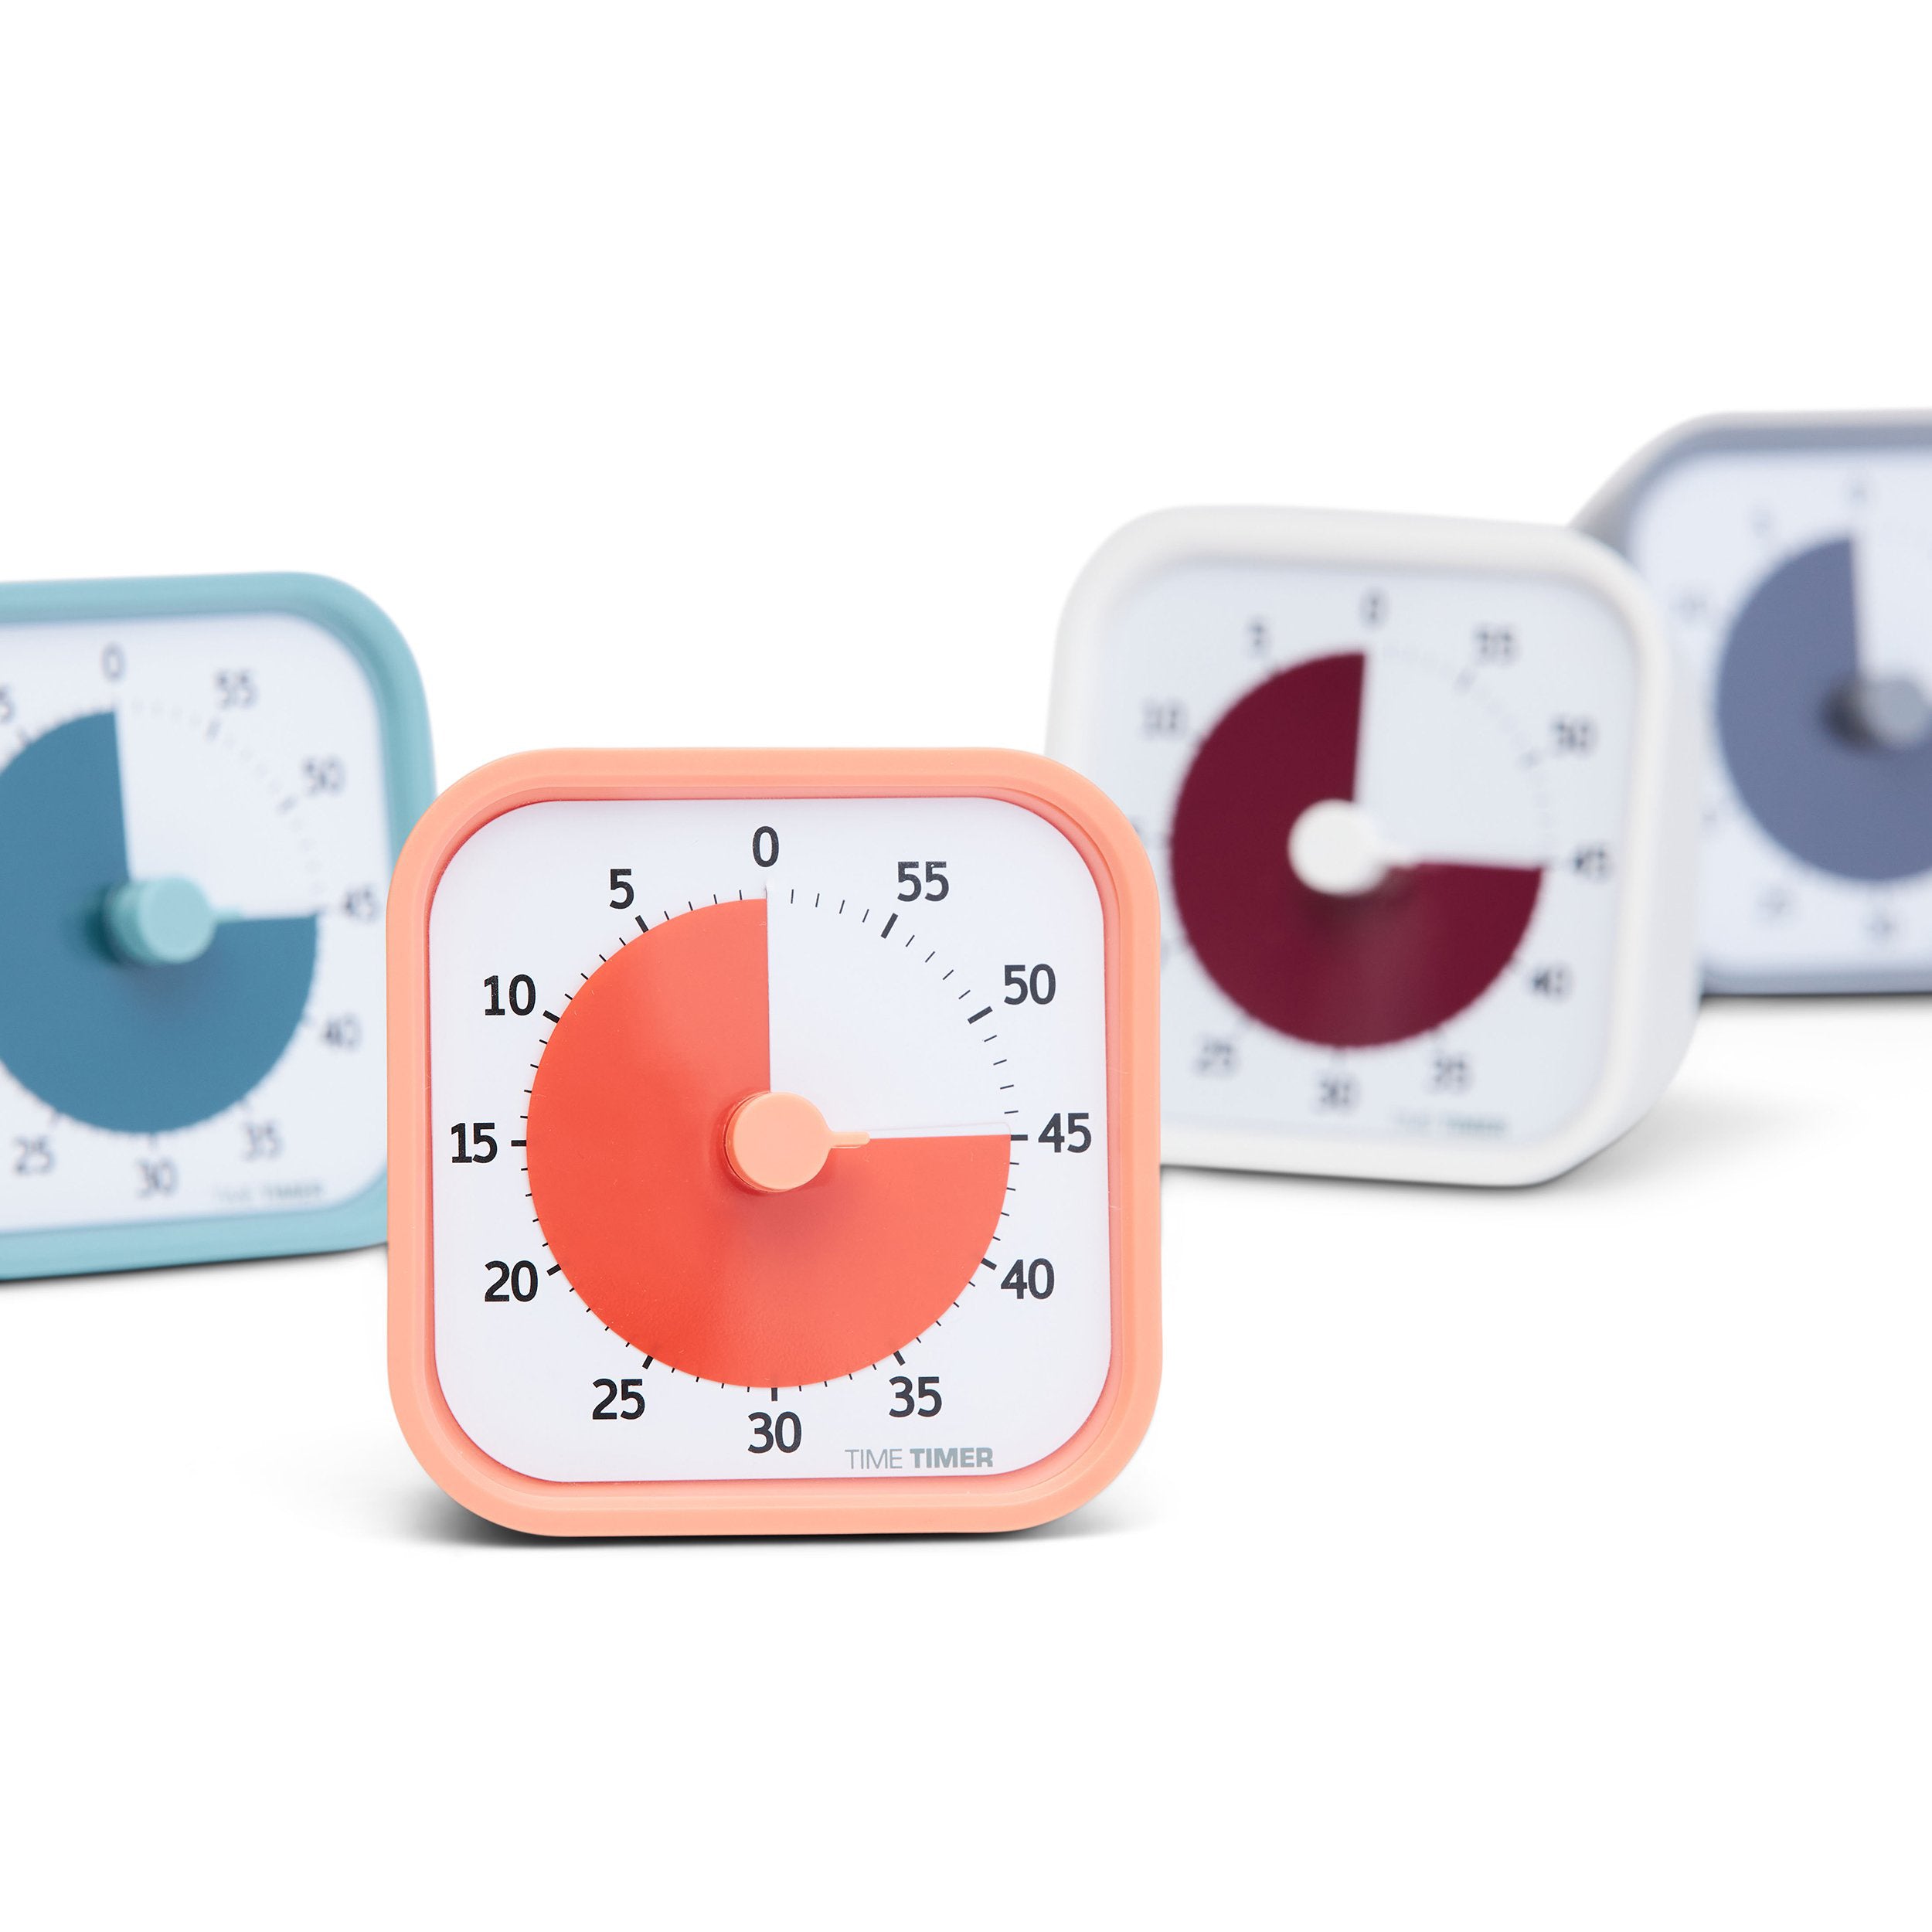 time-timer-mod-home-edition-60-minute-cotton-ball-white- (5)